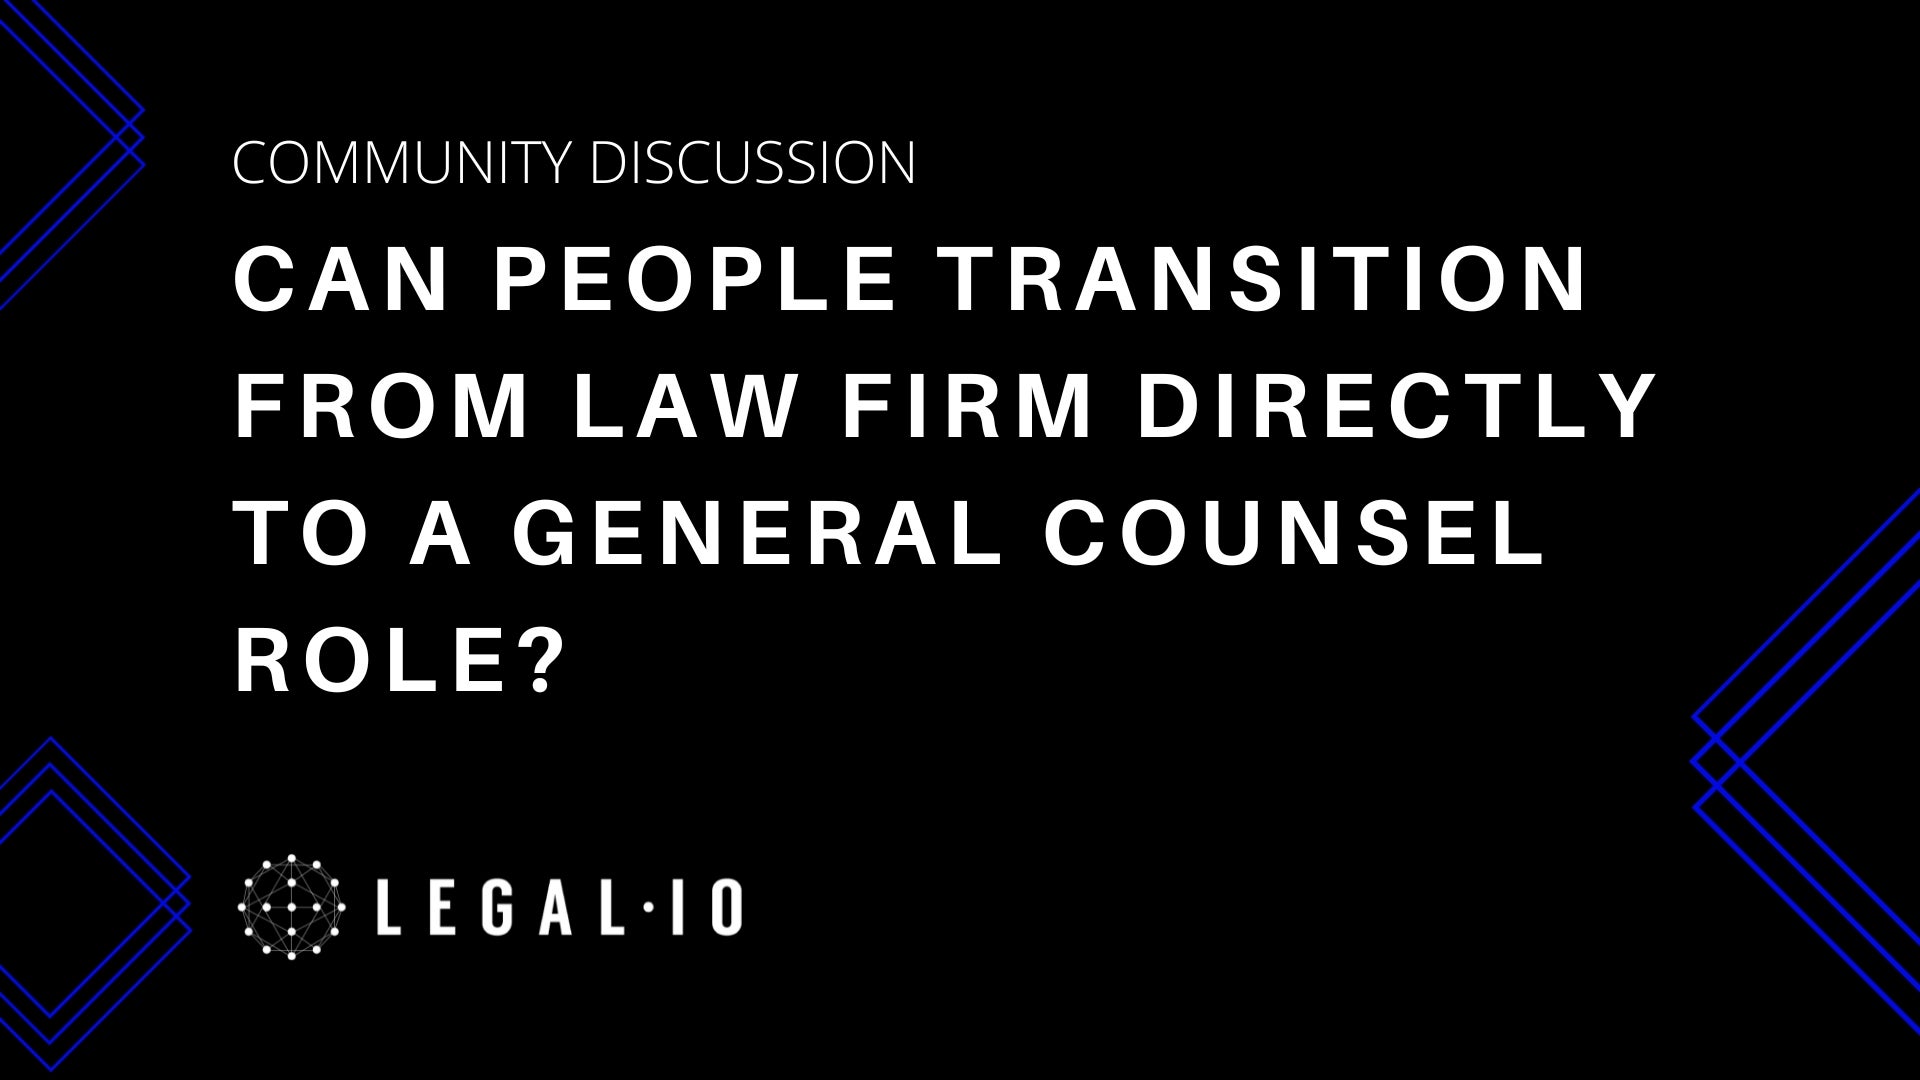 Community Discussion: Can people transition from law firm directly to a general counsel role?